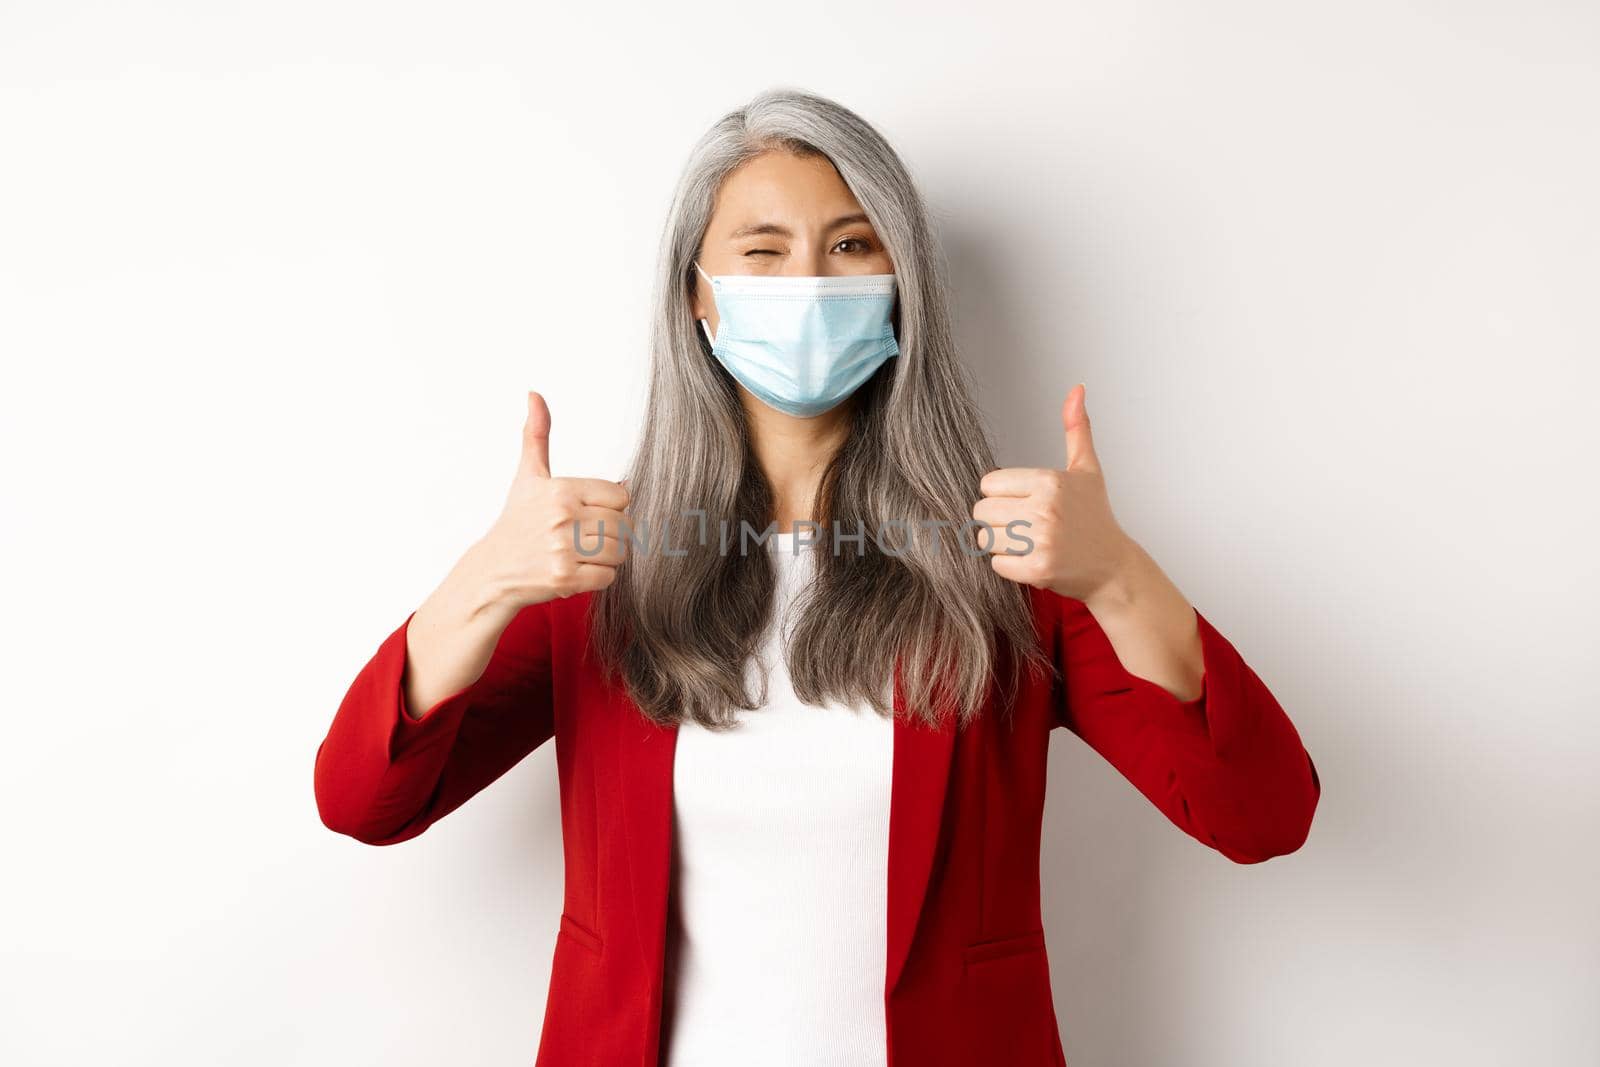 Coronavirus and business concept. Asian female entrepreneur in face mask looking cheerful, showing thumb-up in approval, white background.